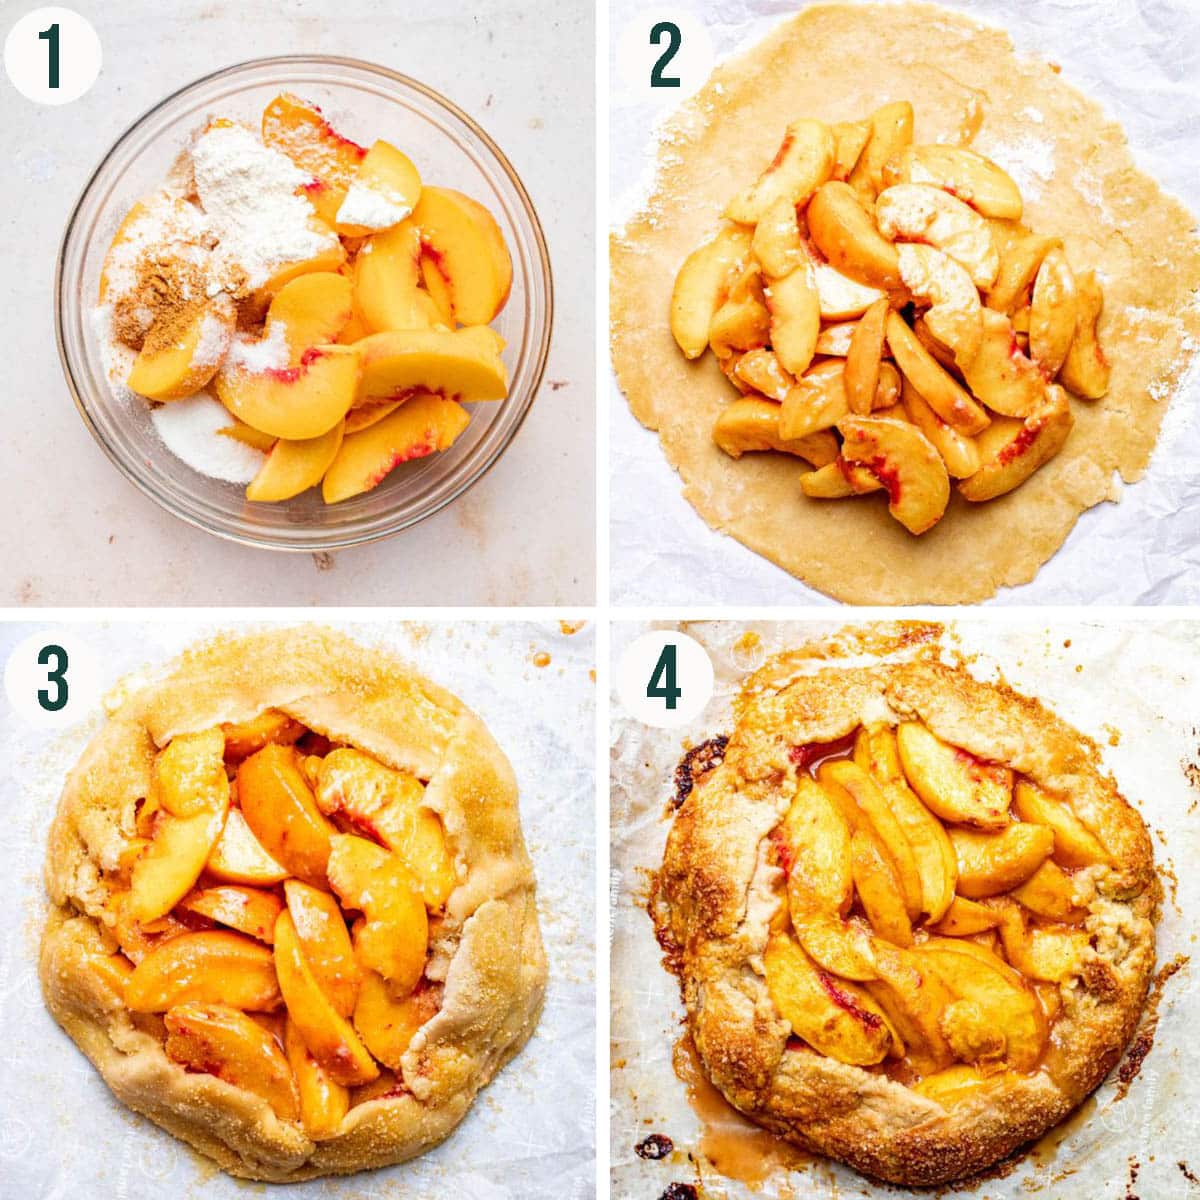 Galette steps 1 to 4, mixing the filling, adding to the pastry, before and after baking.